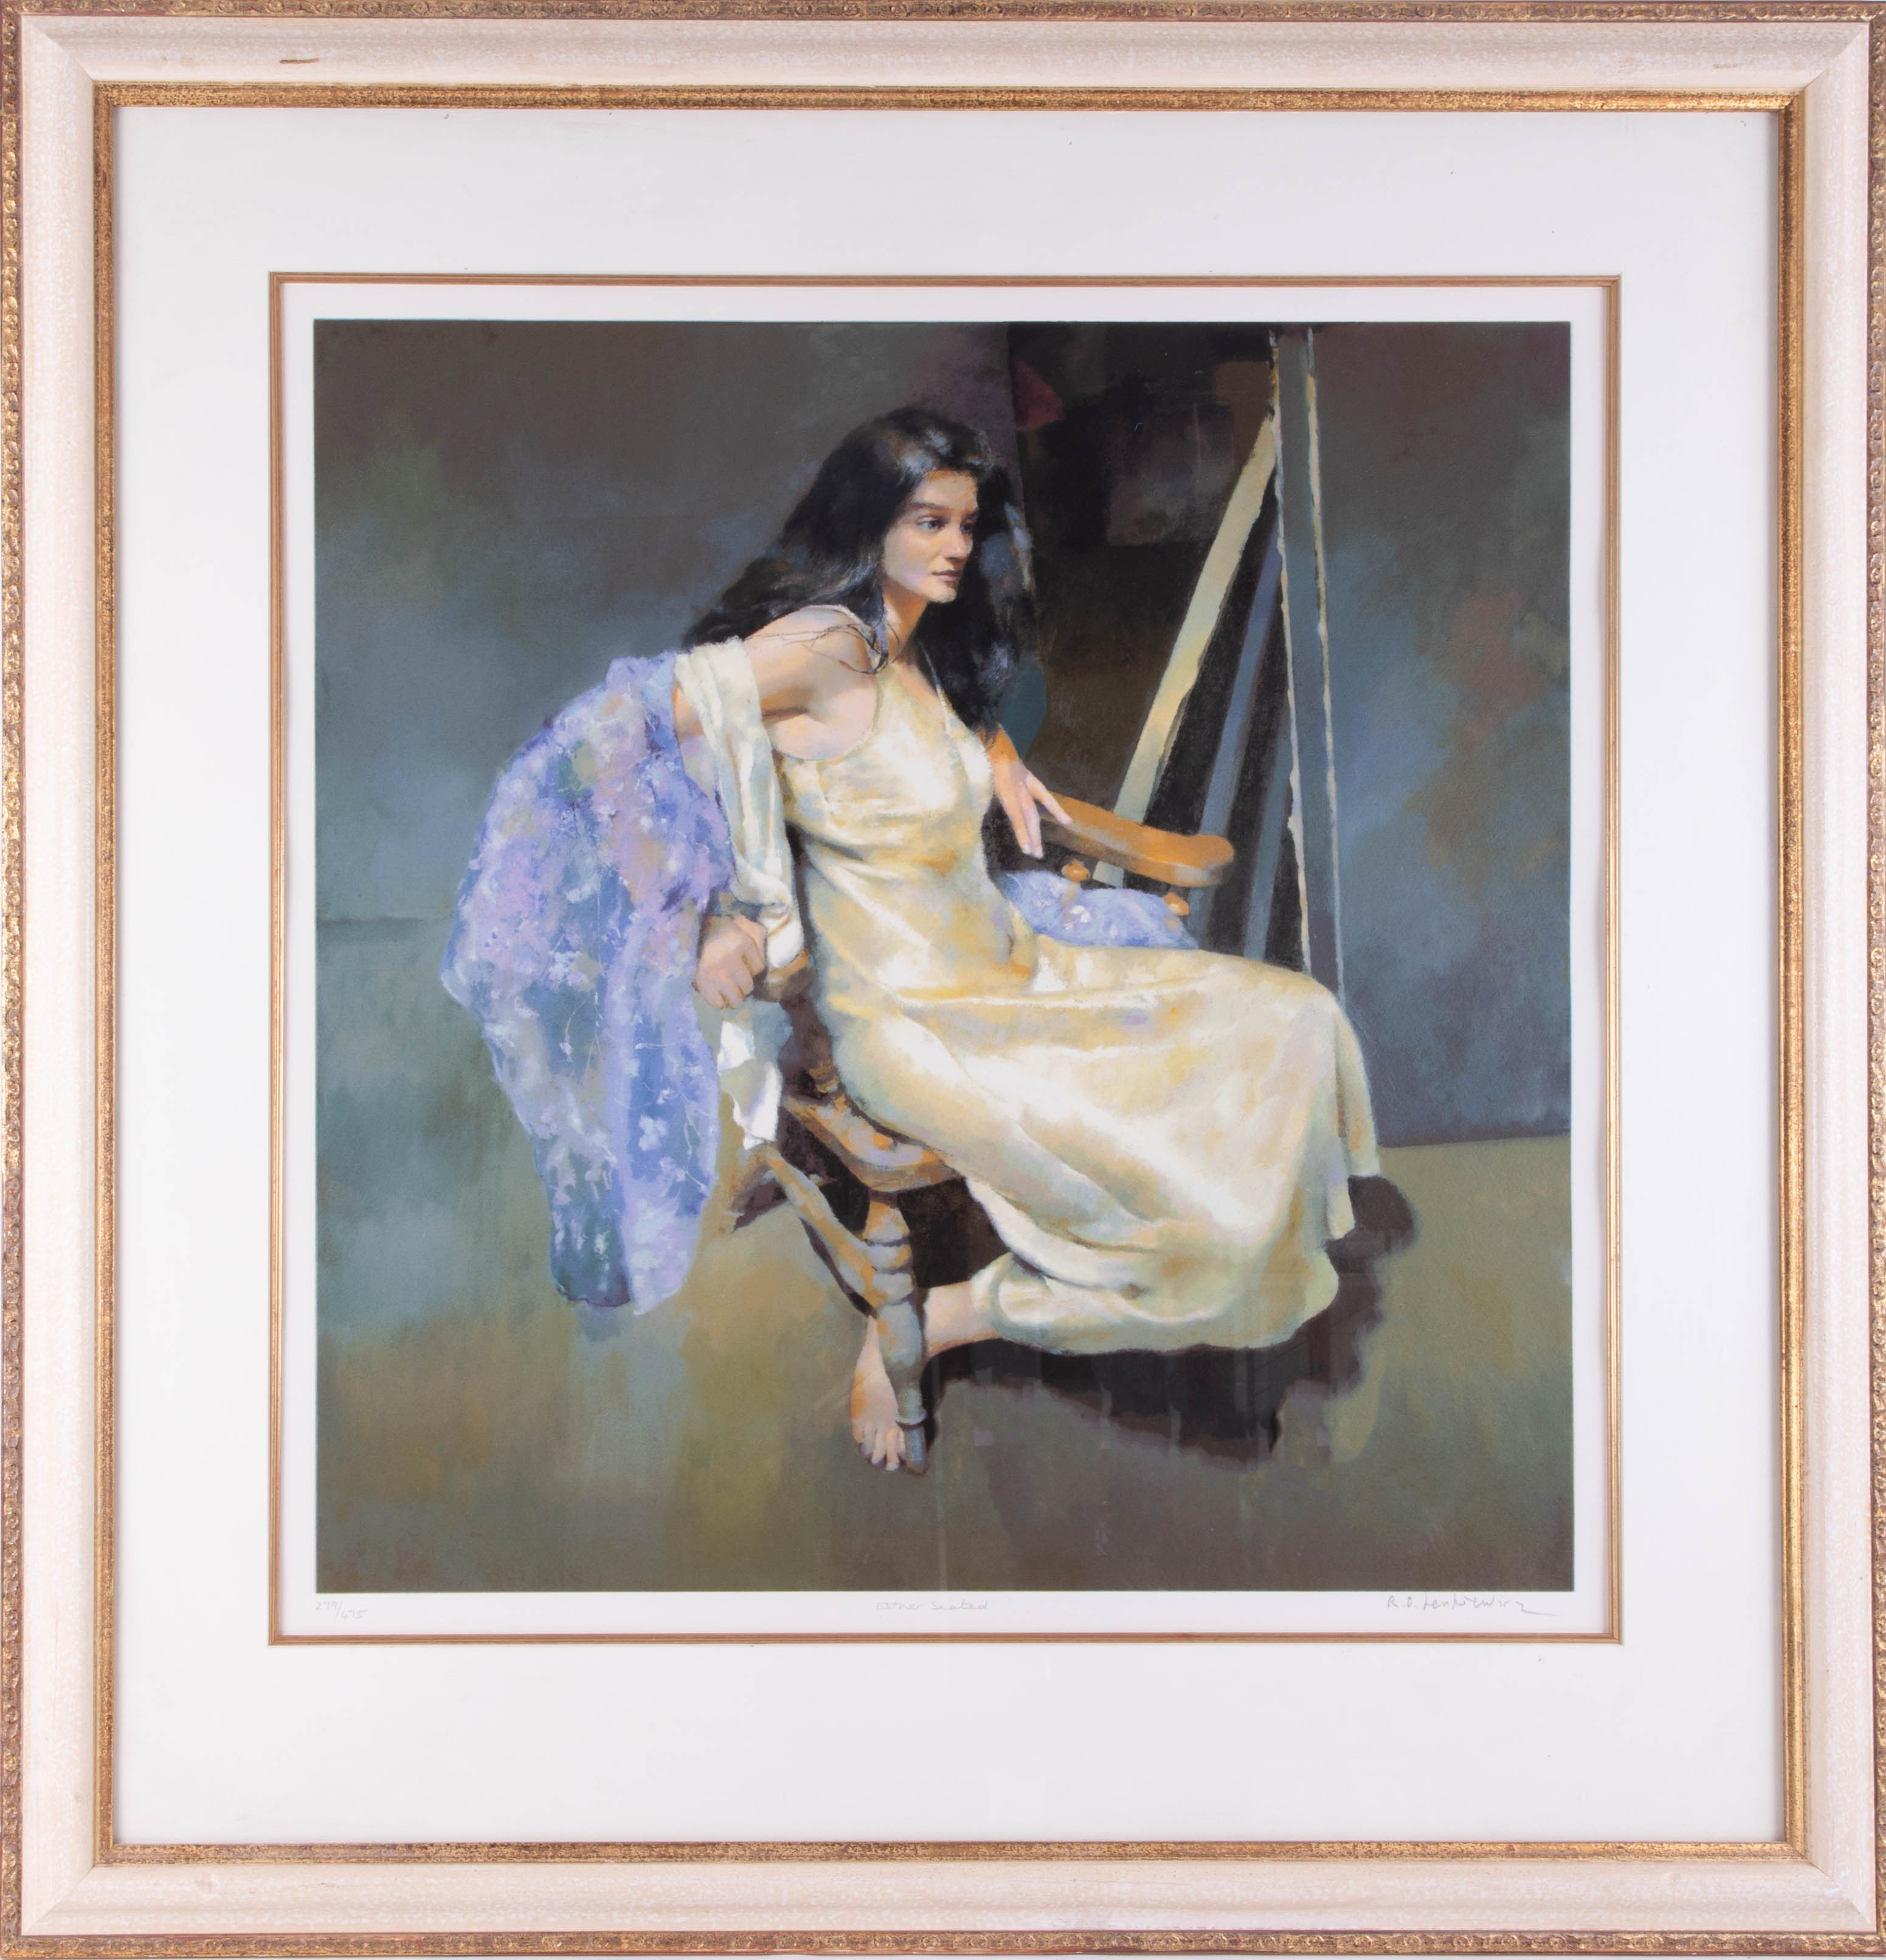 Robert Lenkiewicz, 'Esther Seated', signed limited edition print 279/475, 60cm x 60cm, framed and